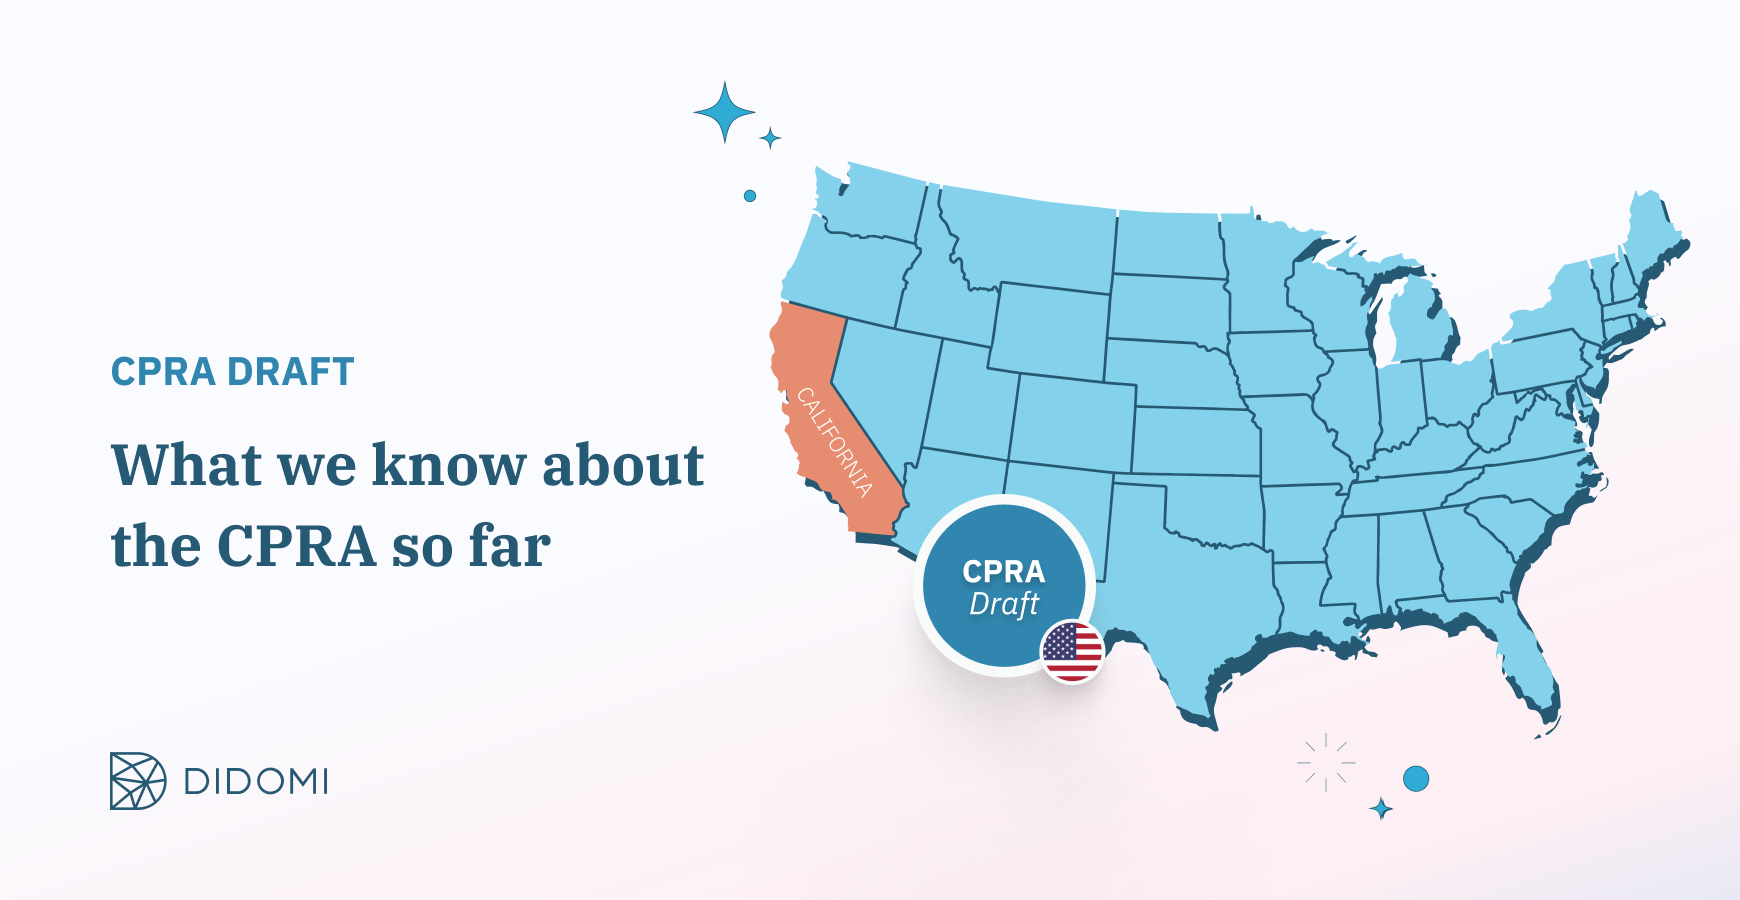 California Privacy Rights Act (CPRA)